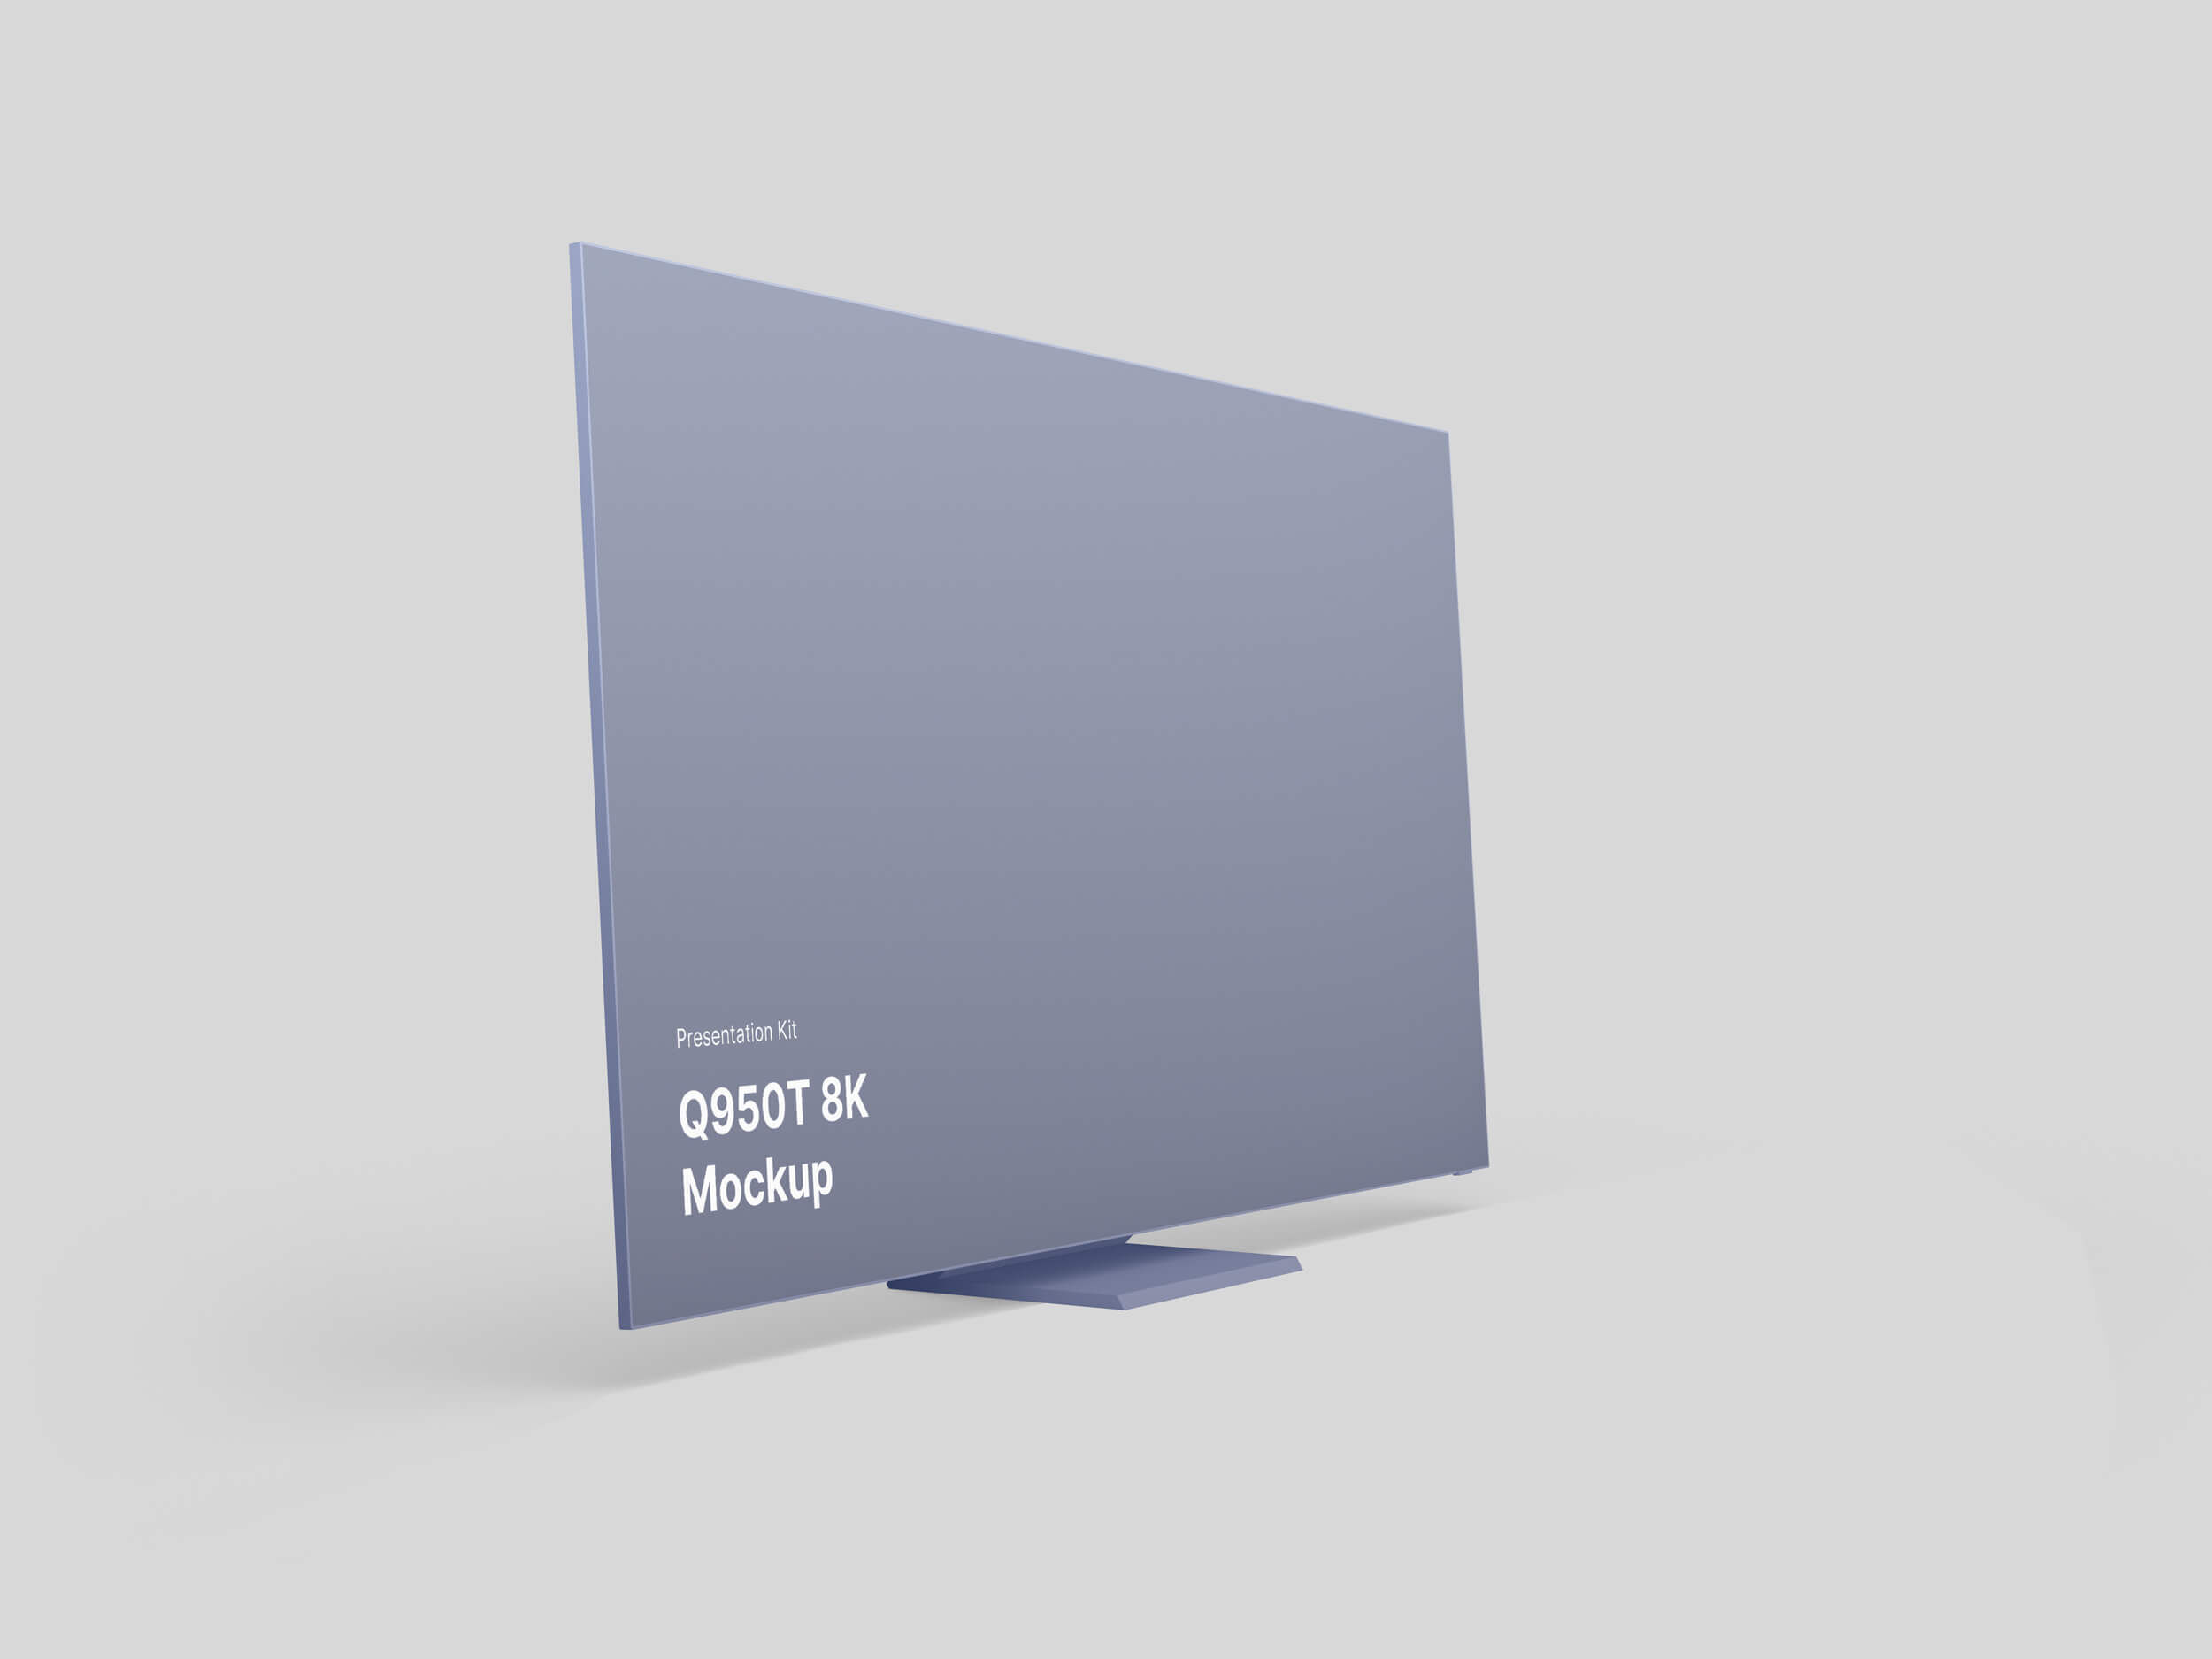 Left Side View of a Flat TV Mockup FREE PSD